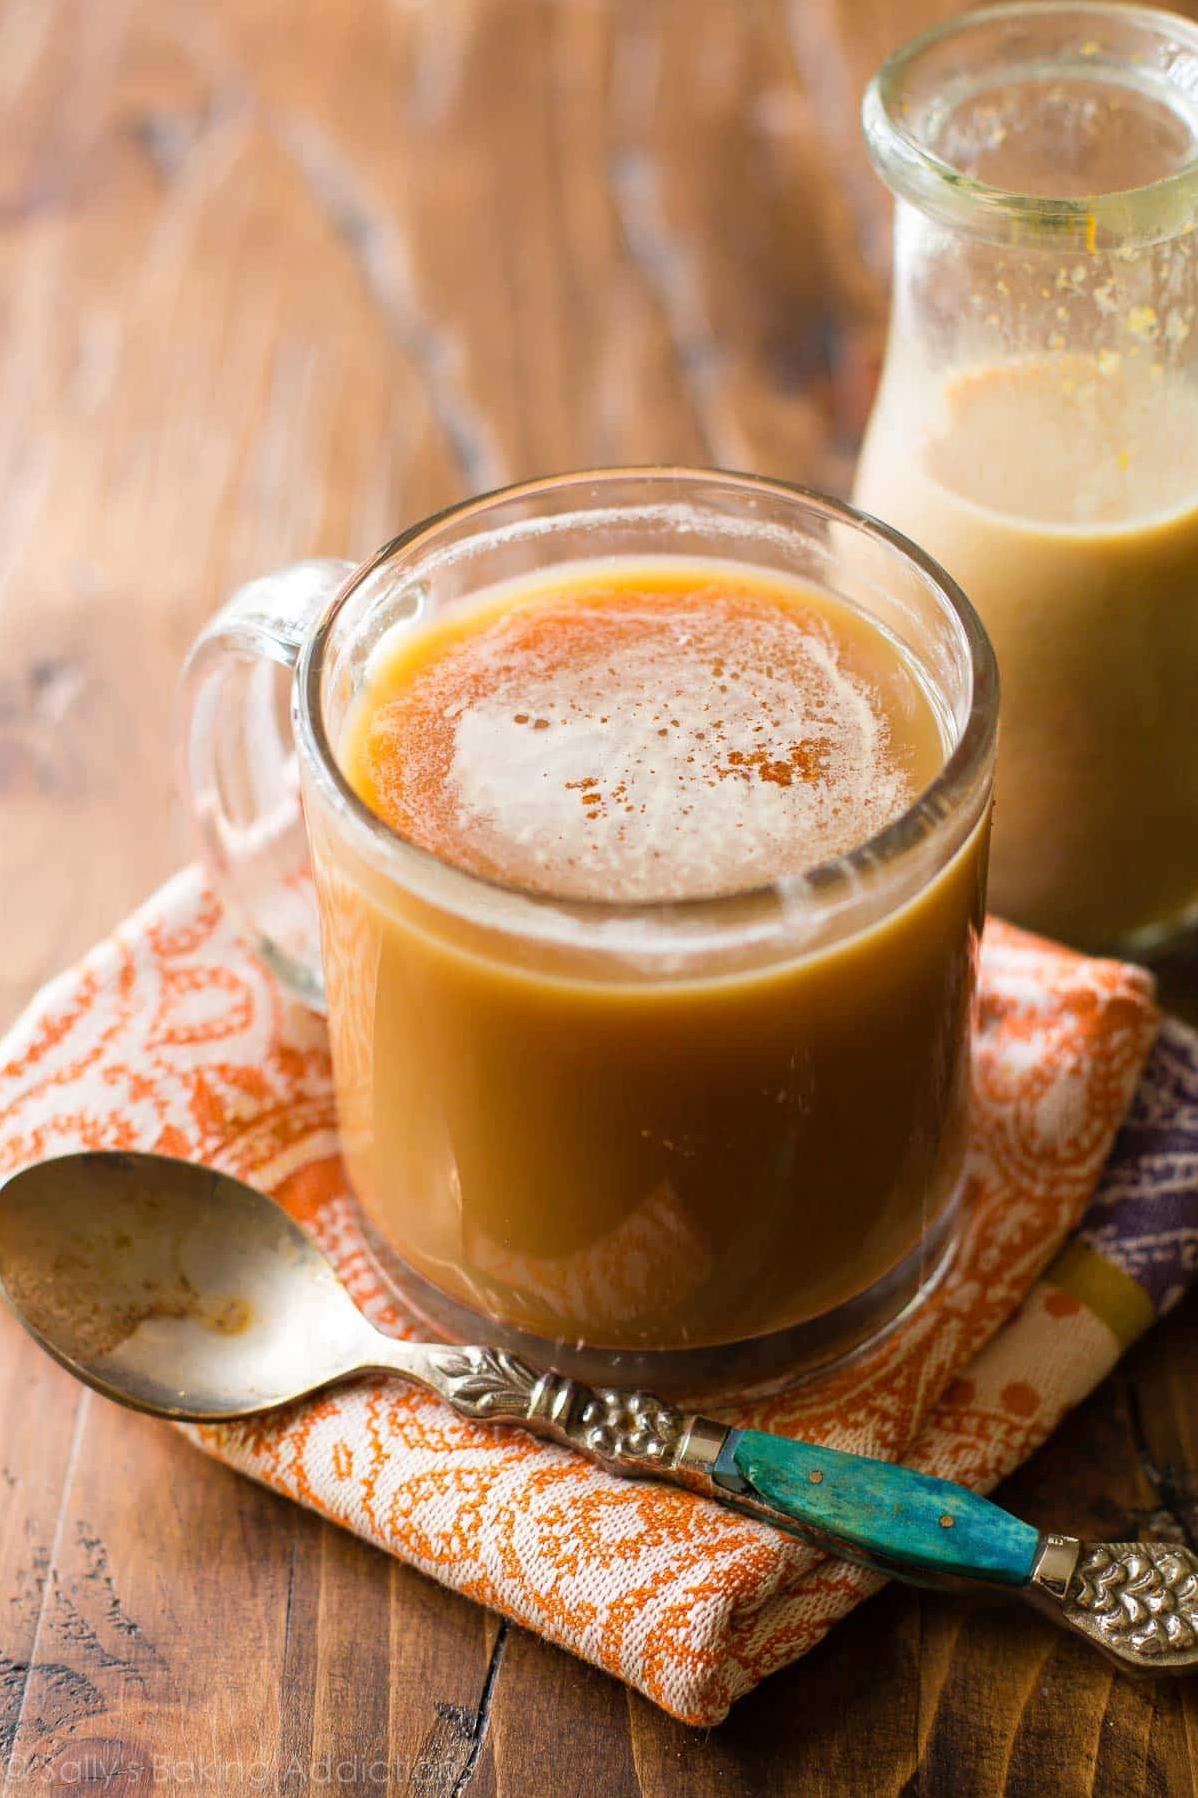  Take your coffee game to the next level with this pumpkin pie flavor!